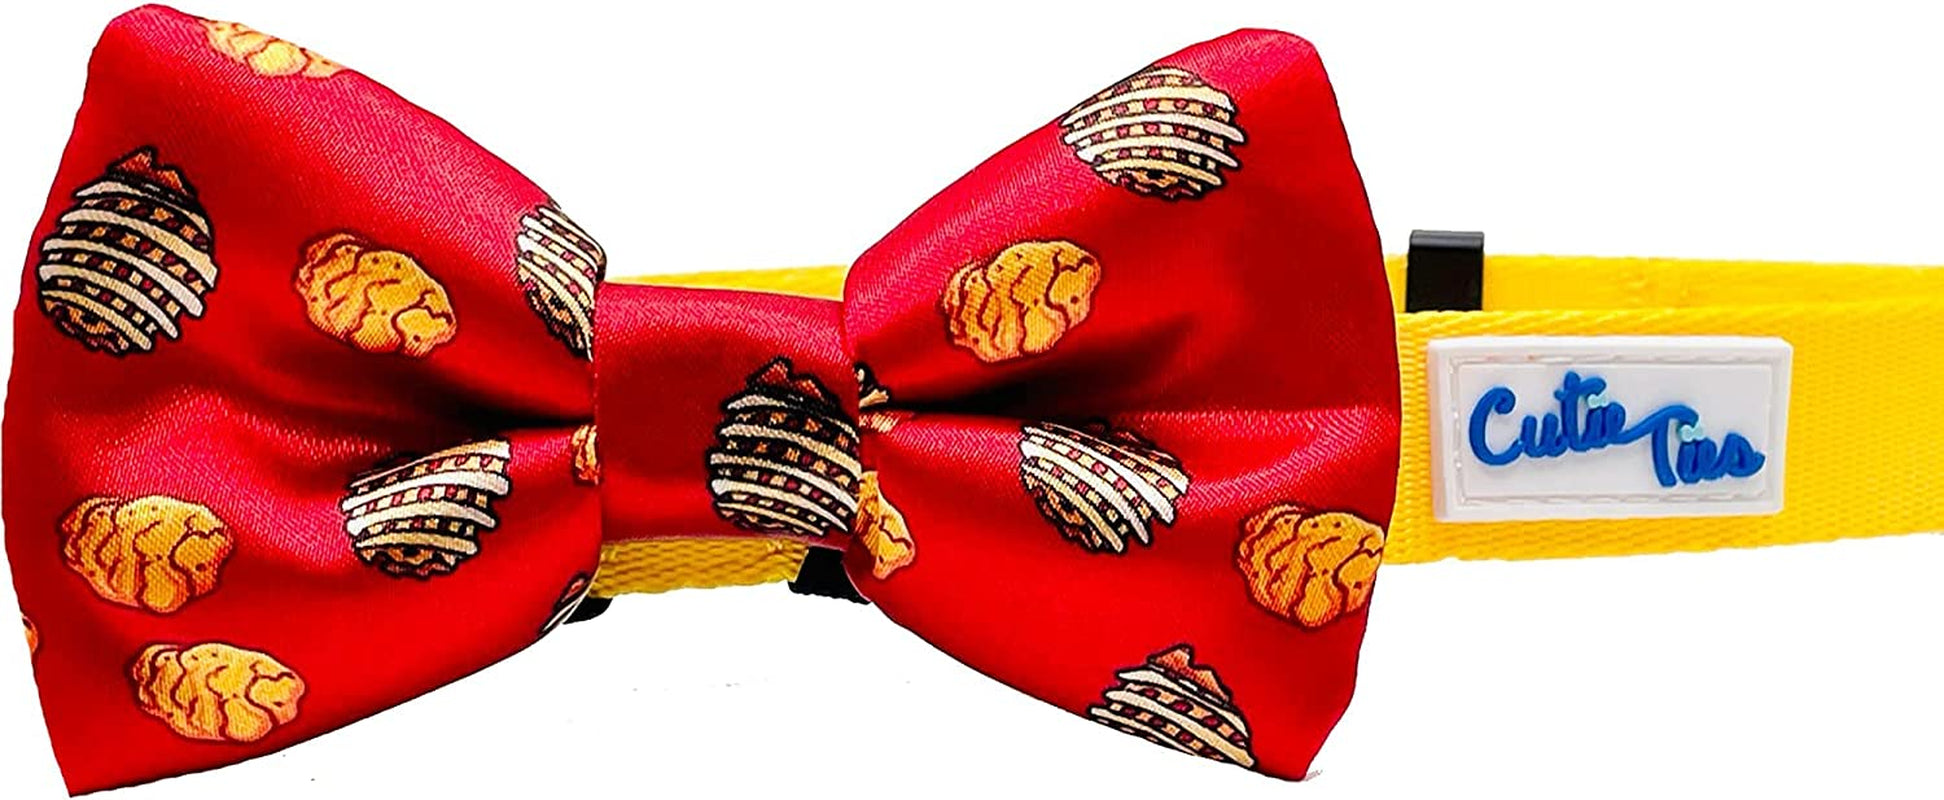 CUTIE TIES Dog Bow Tie Pizza- 2" X 4" Premium Quality Bow Ties for Dogs - Fancy Dog Tie with Slip over Elastic Bands - Cute Dog Tie Fits Most Collars - Dog Tie for Small, Medium and Large Breeds